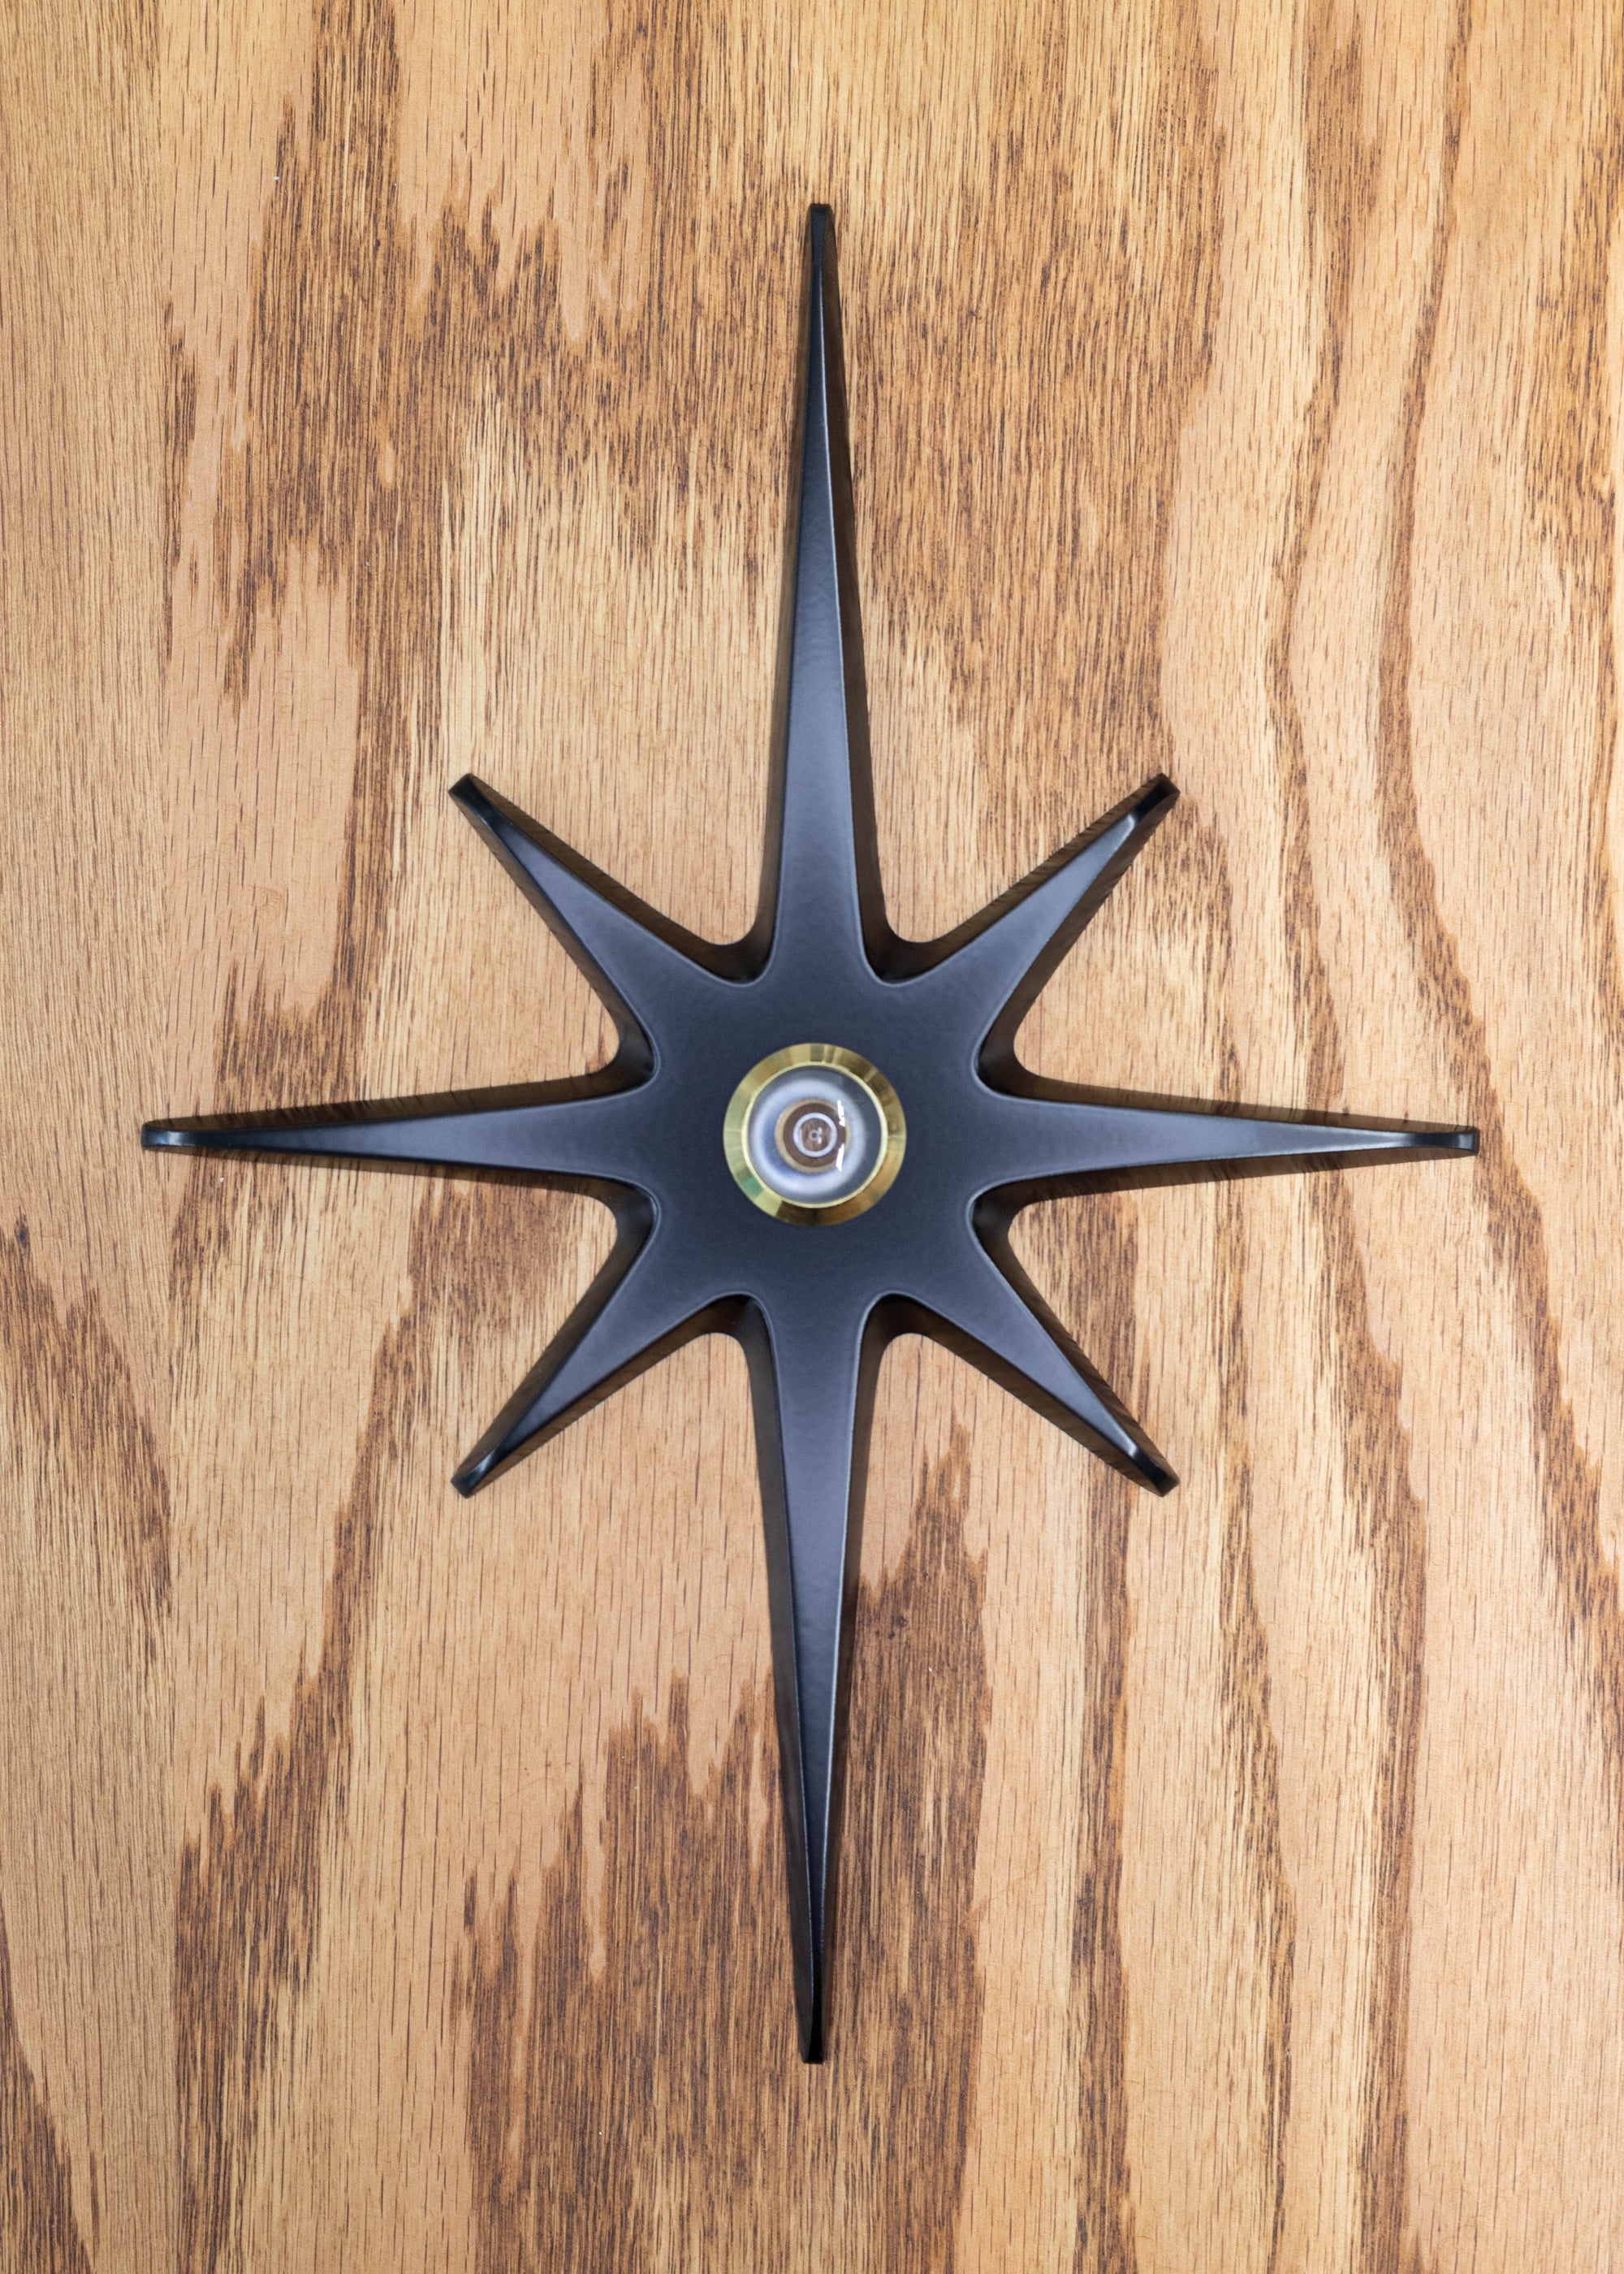 A large cast aluminum starburst with a peephole viewer in the center. The starburst has a black powder coating and the peephole is gold rimmed. The powder coat finish is matte, so it's not glossy with shine, but the surface is still smooth and gives slight reflection of light.